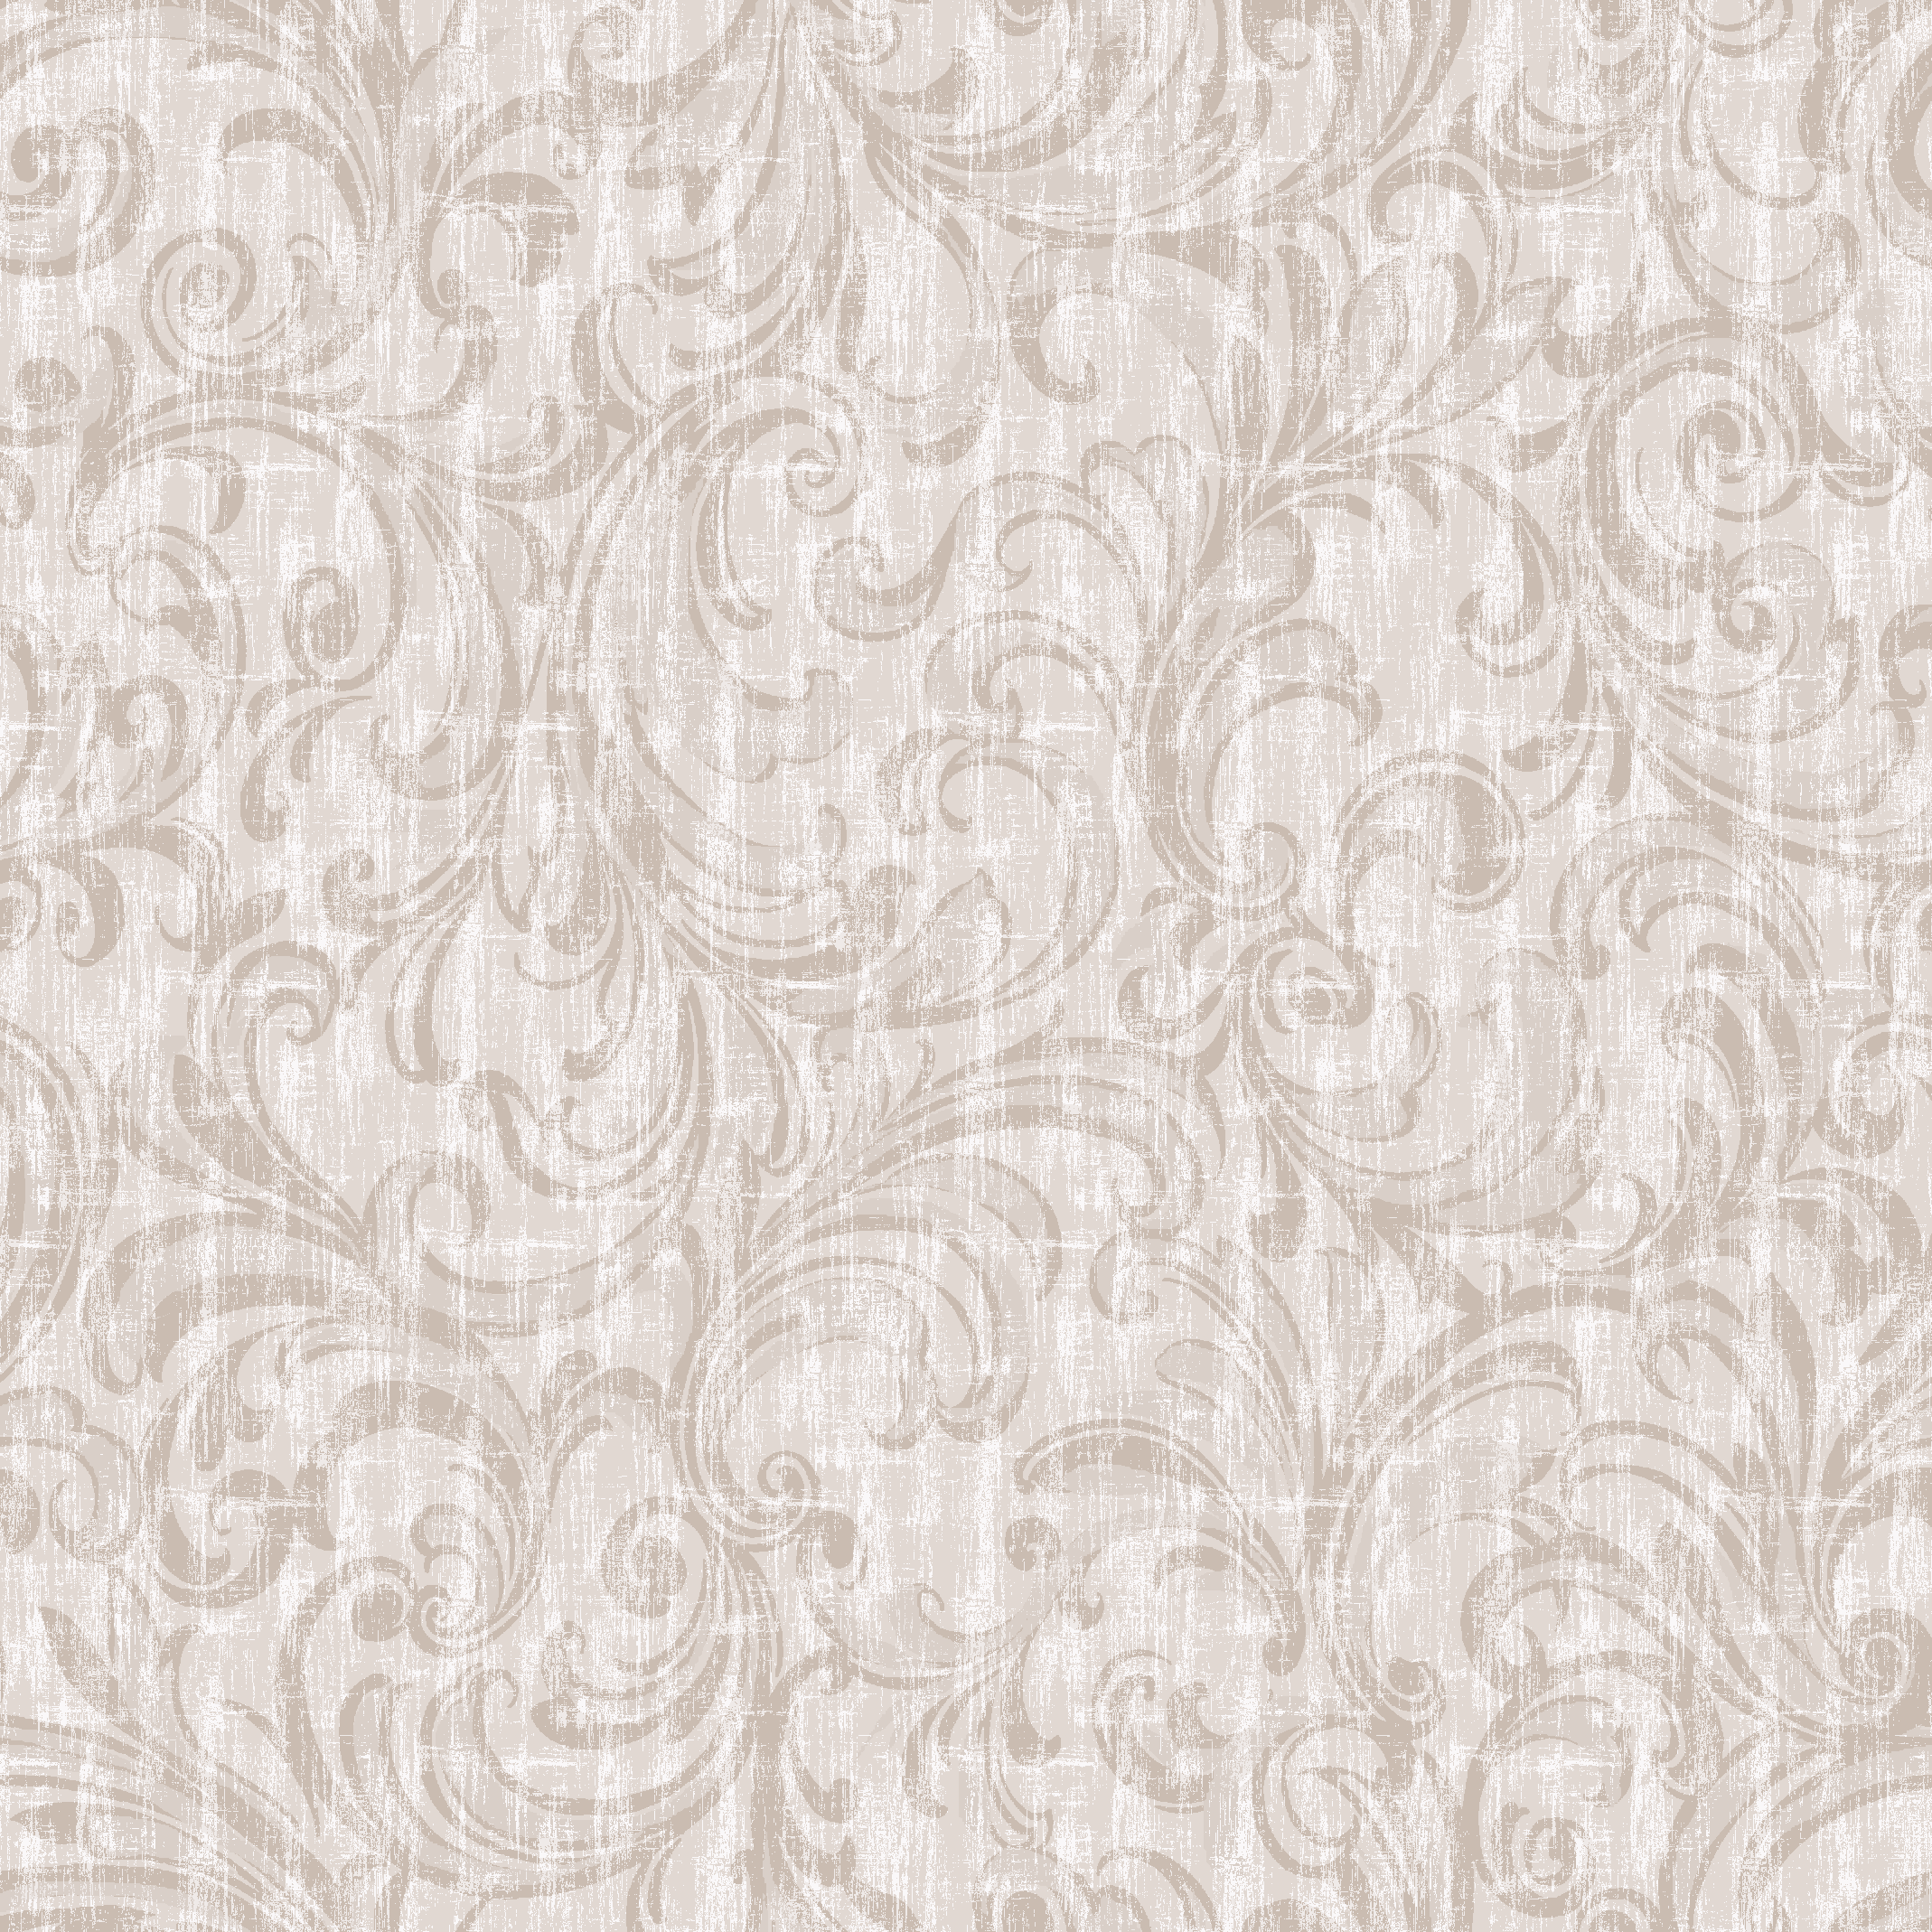 Waverly Inspirations Cotton 44" Dancing Scrolls Neutral Color Sewing Fabric by the Yard